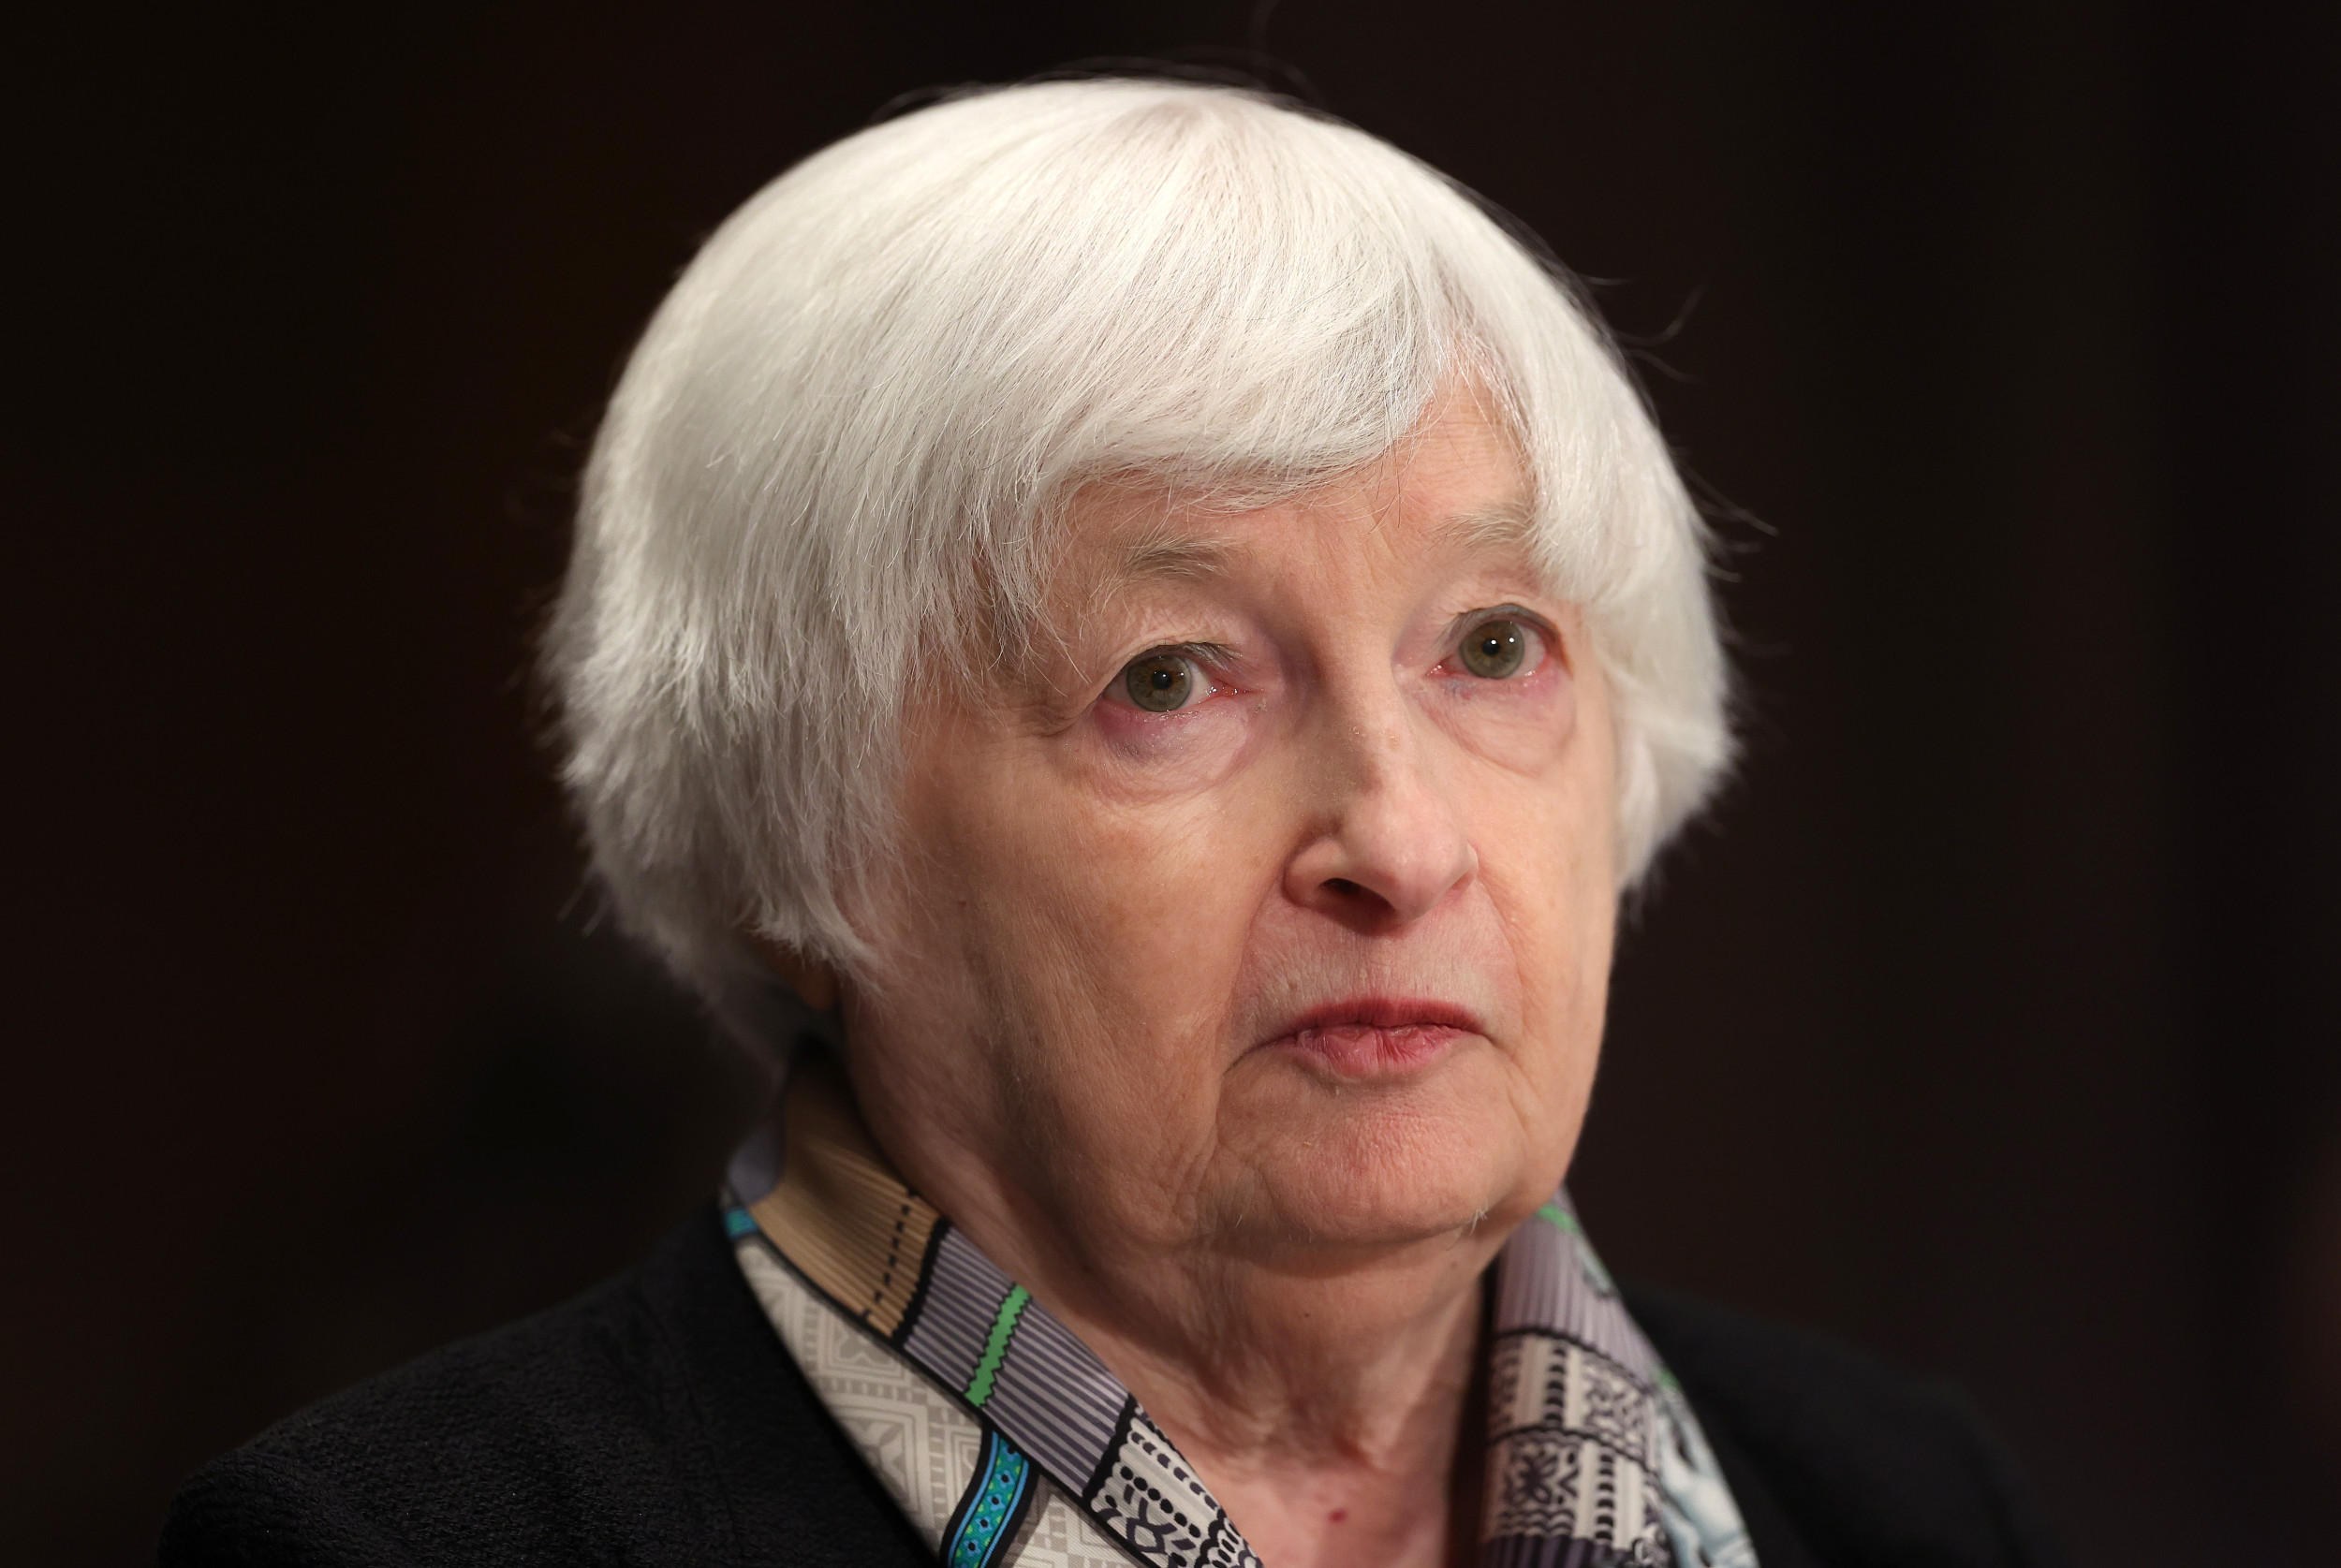 yellen in china: failure was the only option | opinion